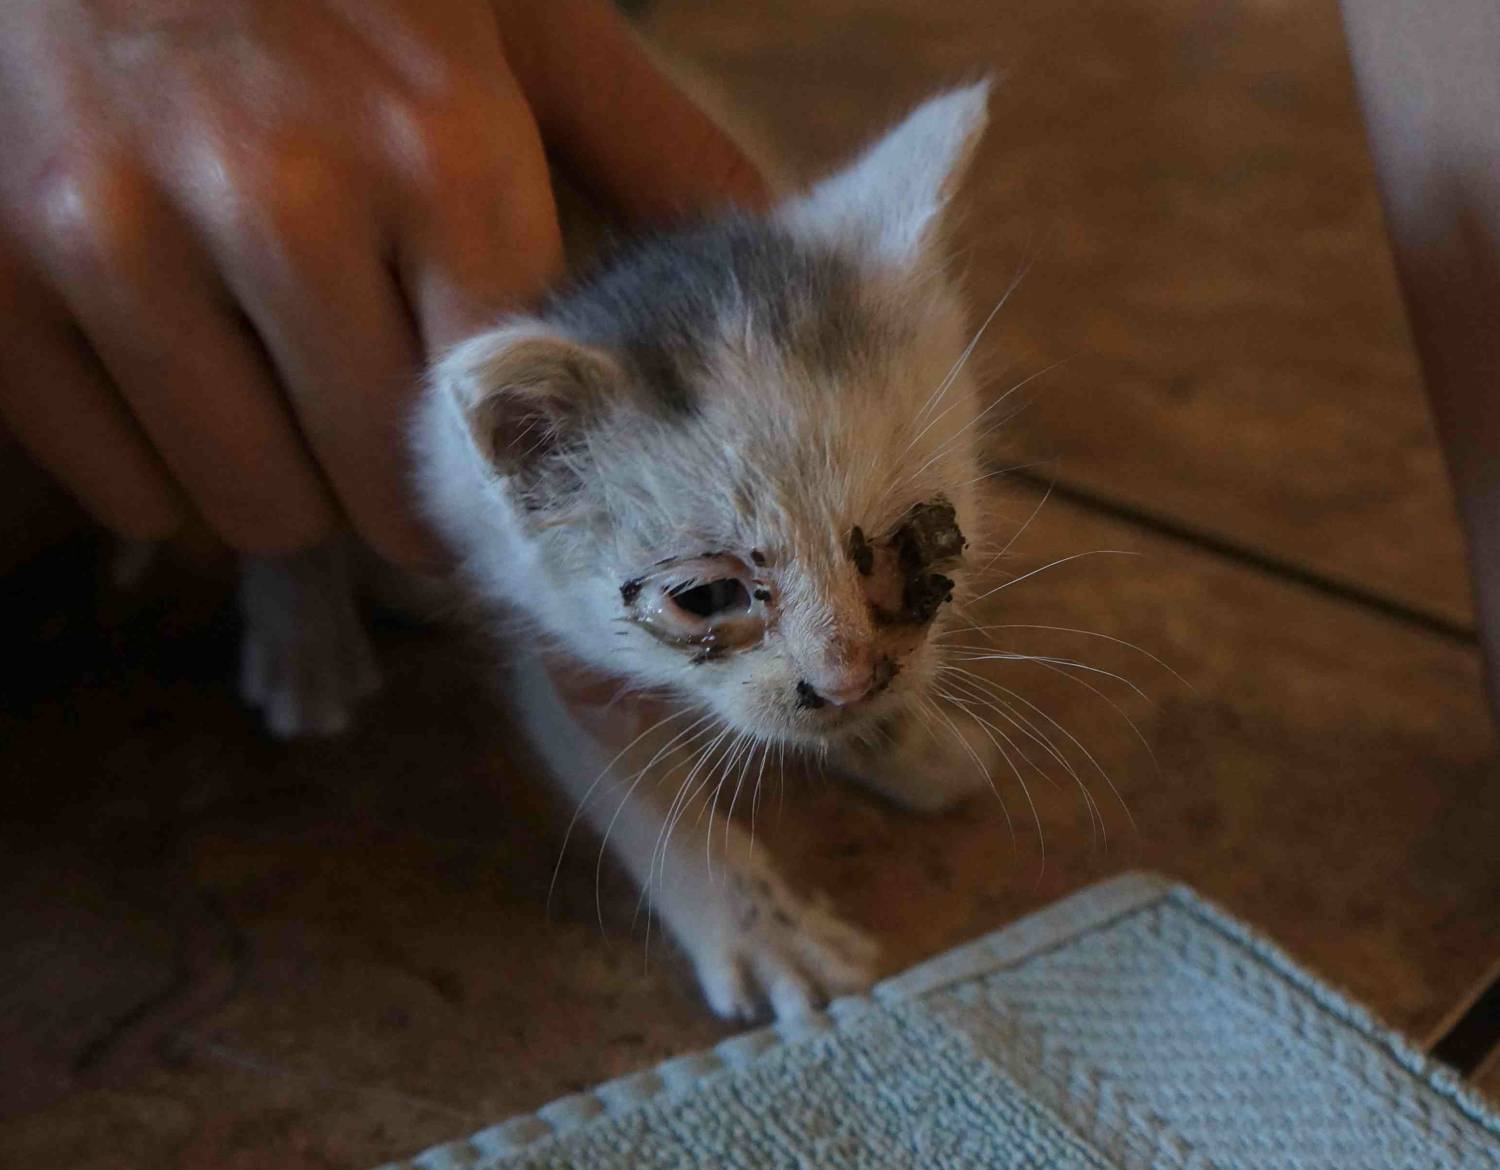 Let meow-t! Kitten trapped behind wall is saved... by earthquake rescue team